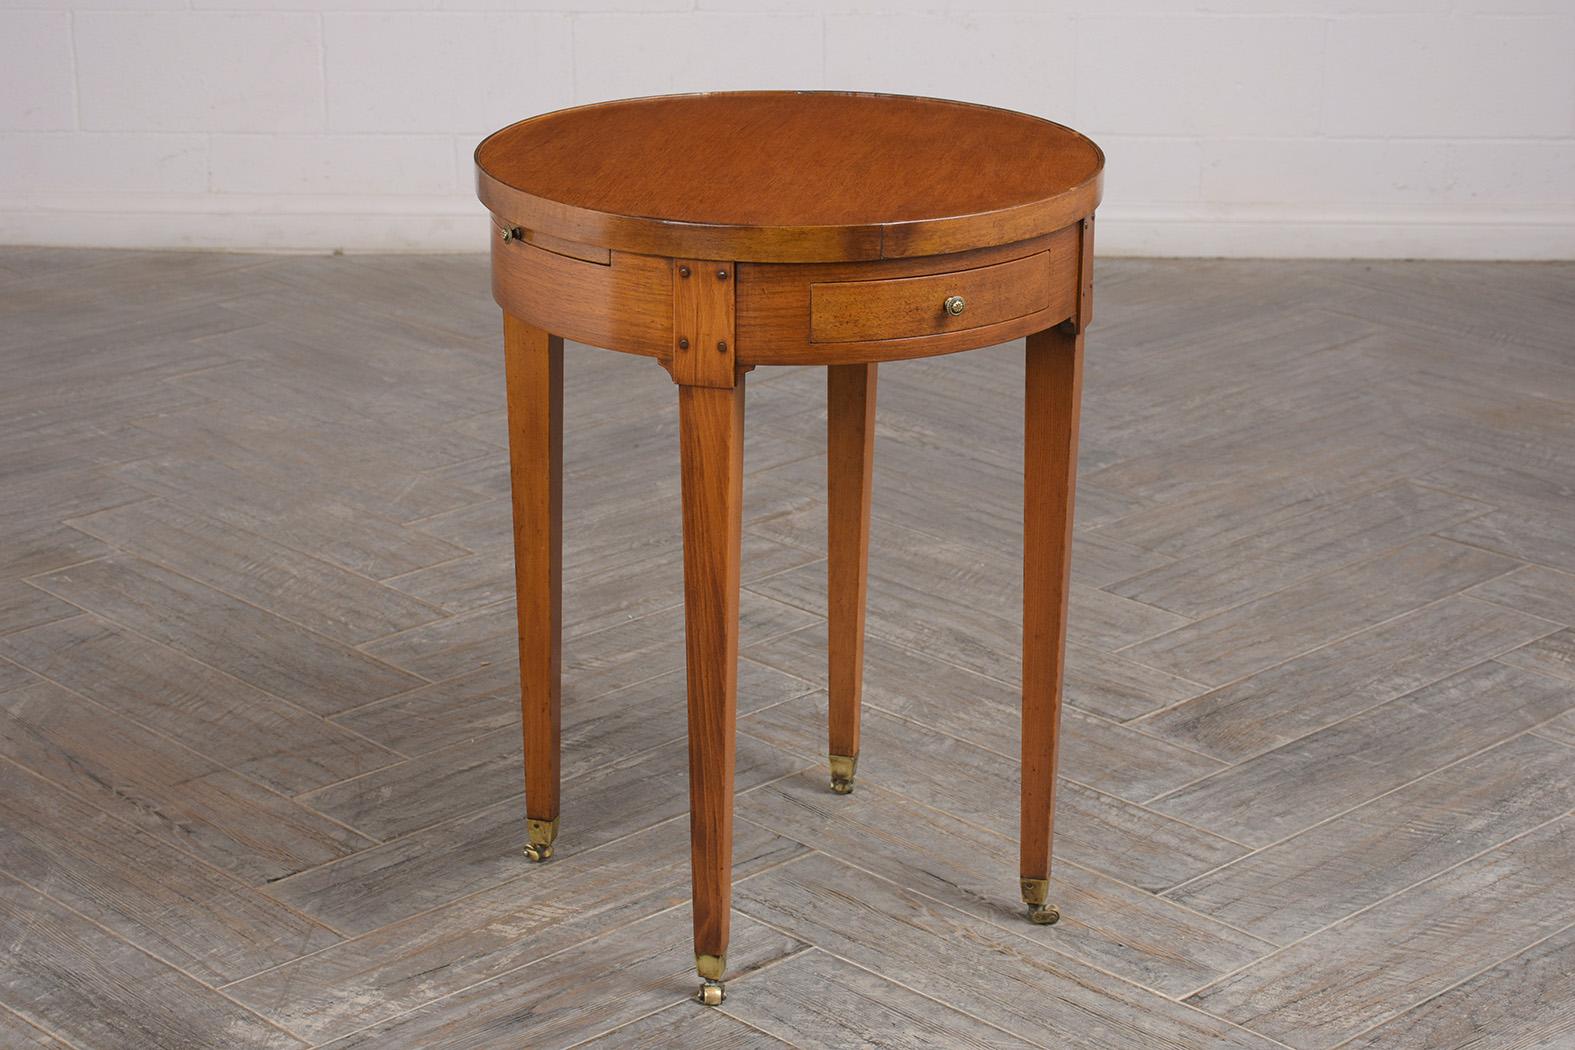 This French late 19th century Louis XVI style side table is made out of cherrywood stained a light walnut color. It features a wooden top, two small drawers with brass knobs, and 2 pull leaves with gilt embossed leather inserts. It rests on four